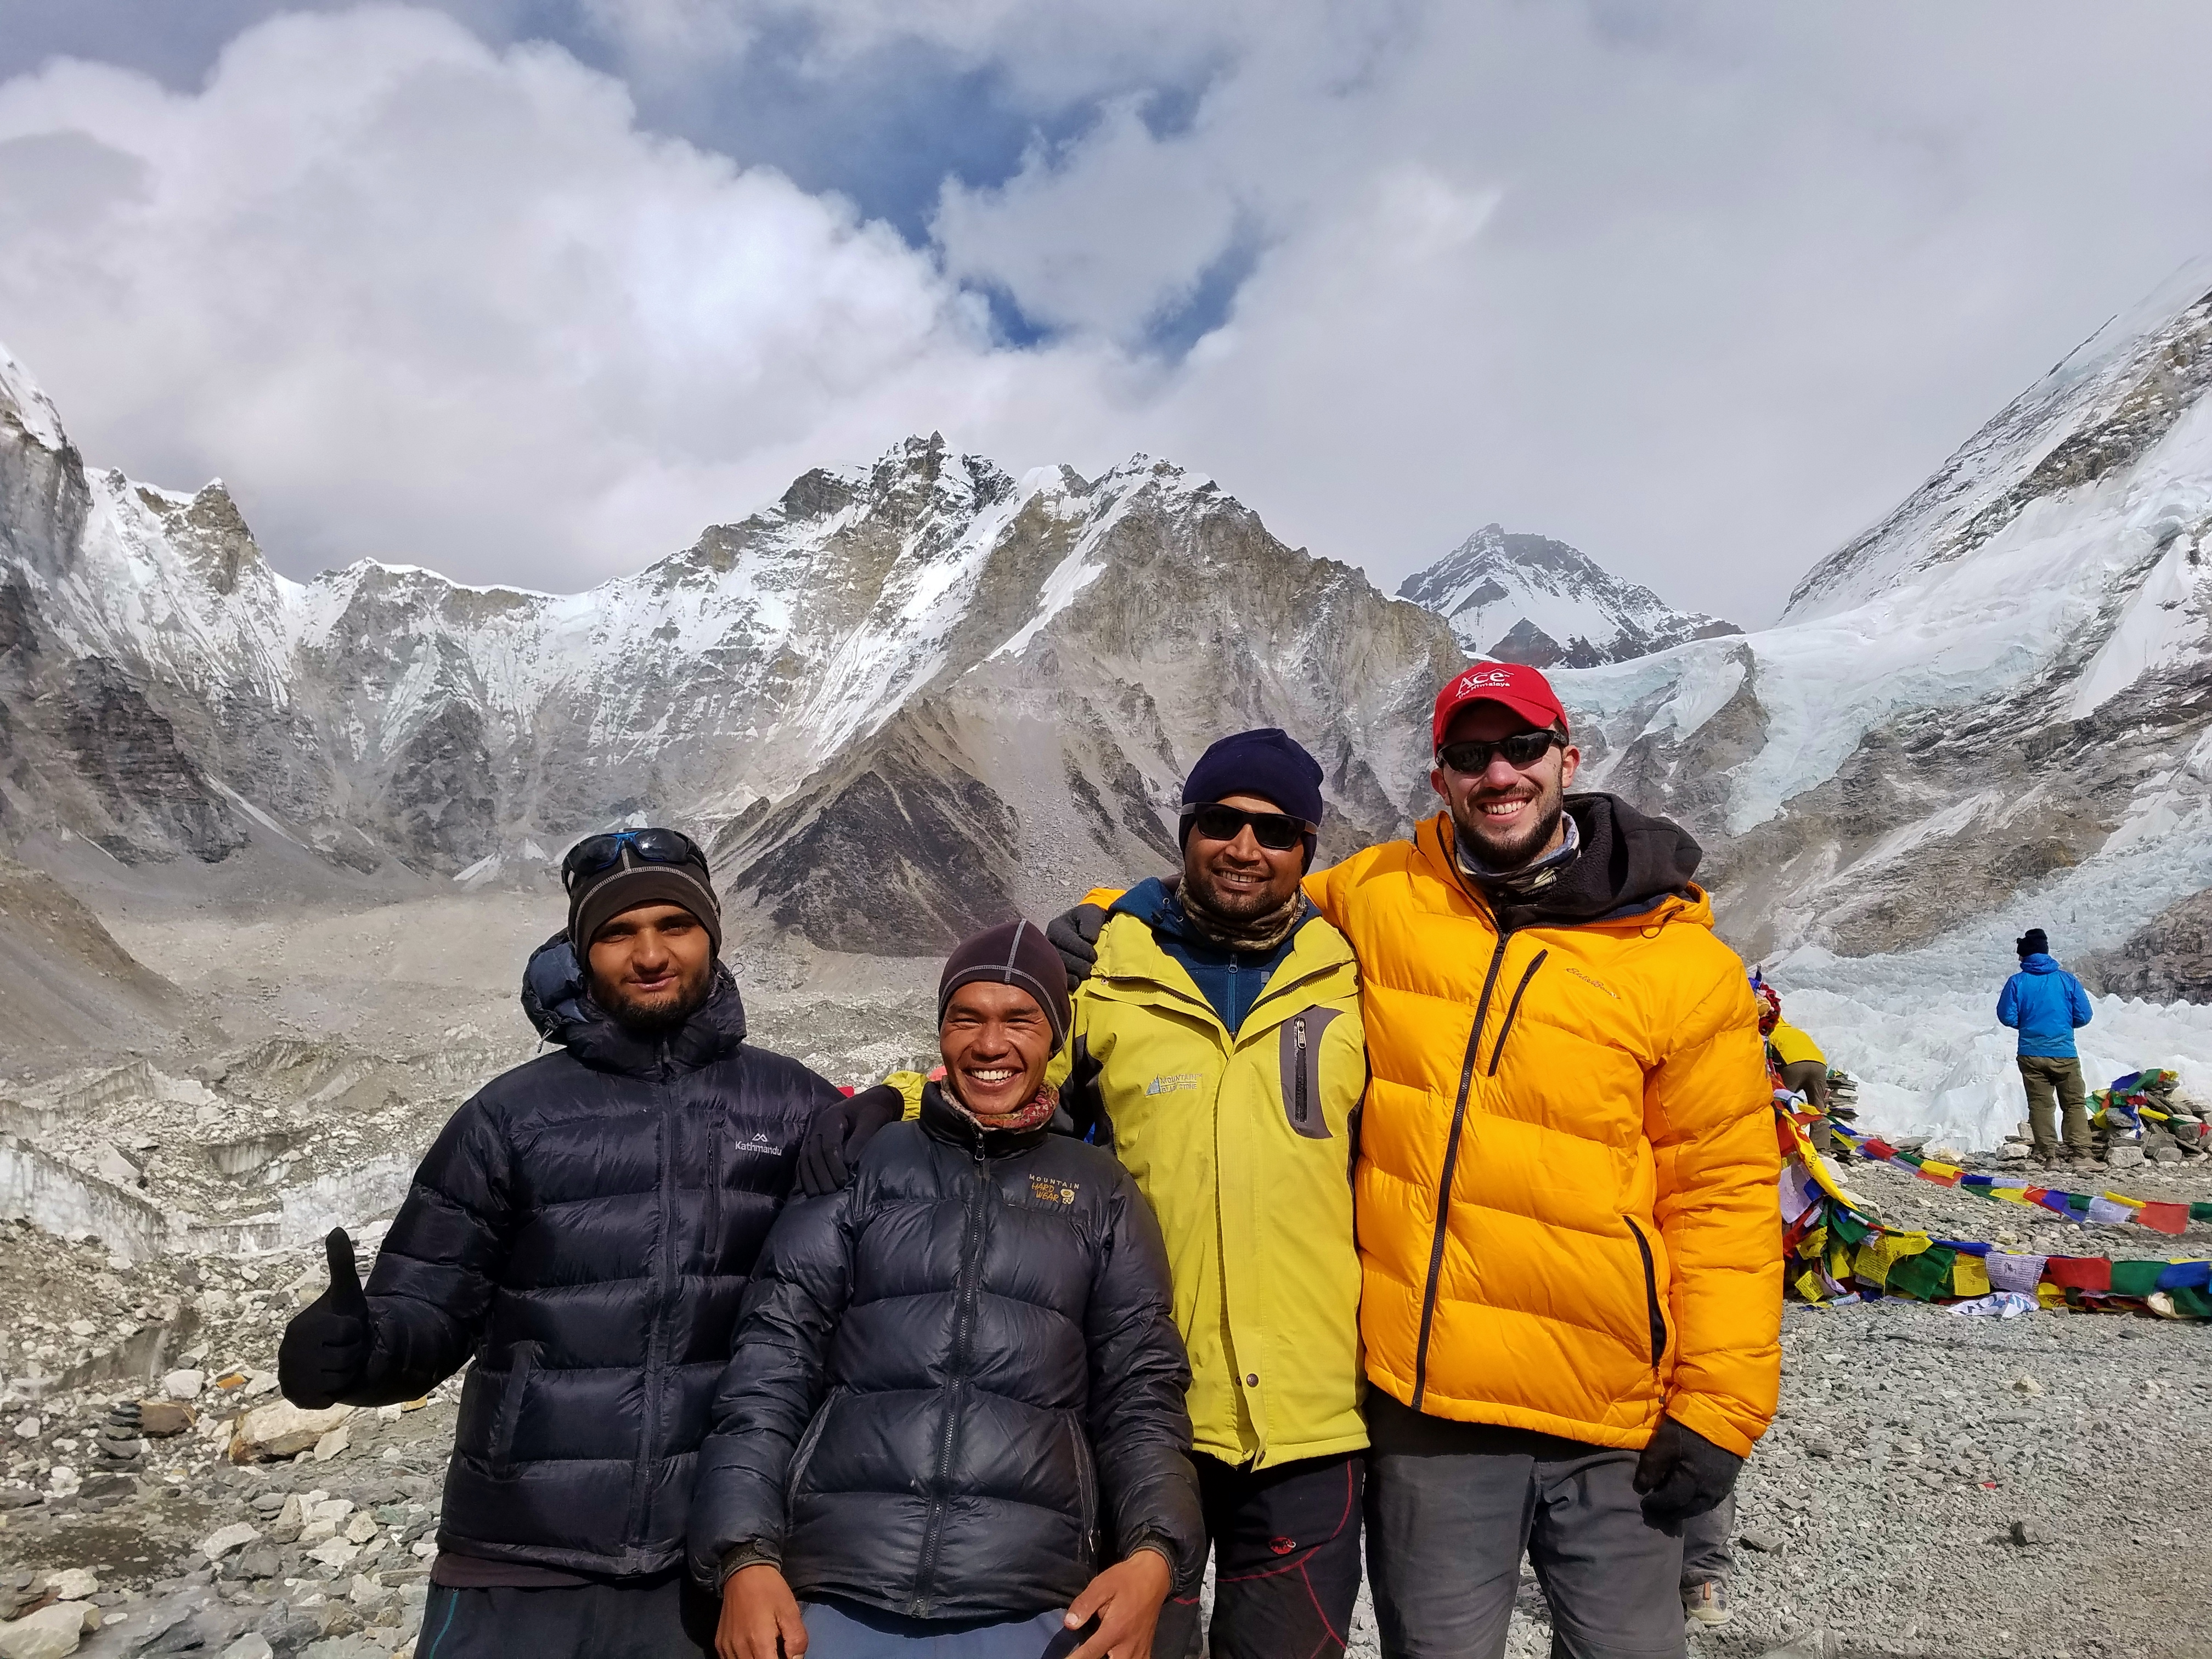 Antonio Fiori with Sherpa guides at Mount Everest base camp in Nepal